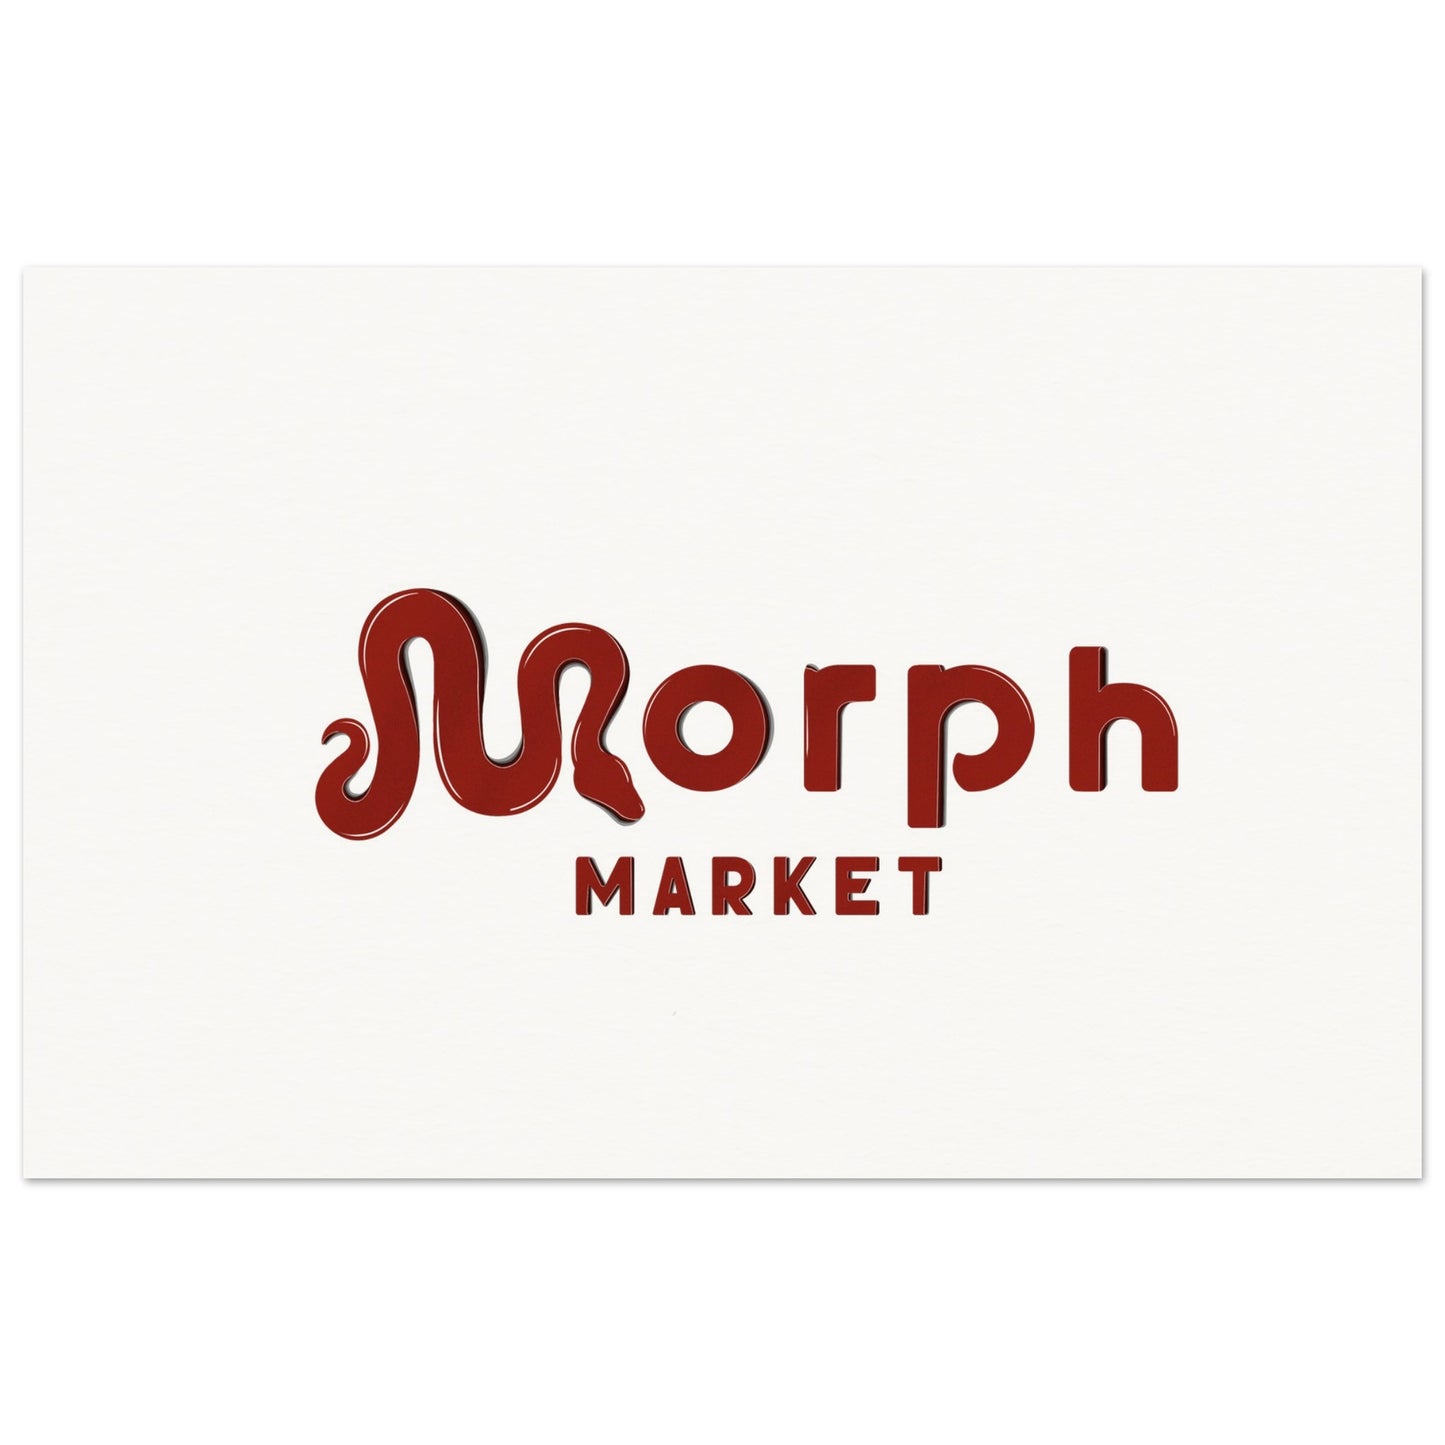 Morph Market (Red) - Museum-Quality Matte Paper Poster